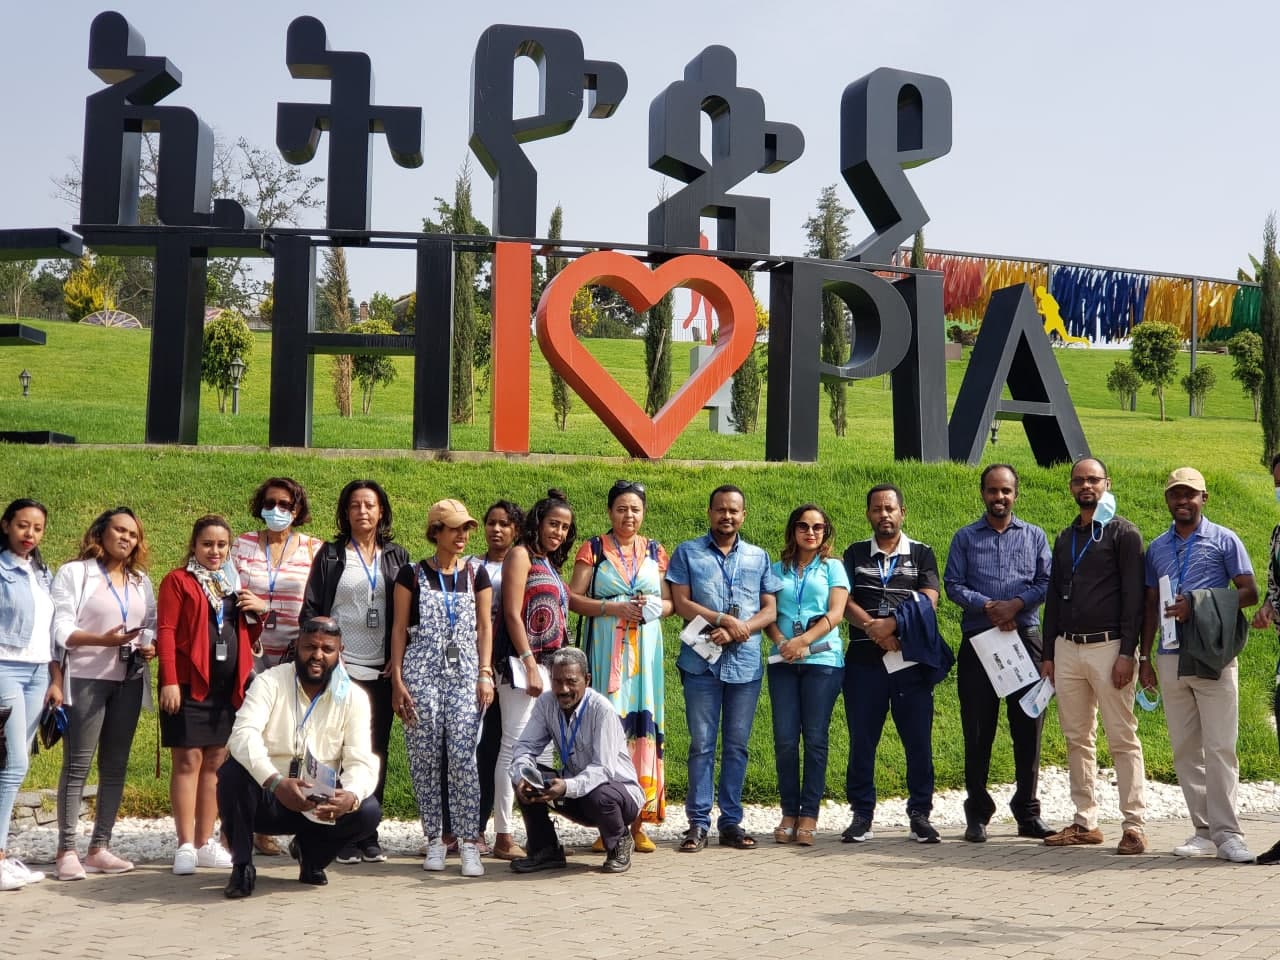 ETHIO-RE STAFF VISITED THE UNITY PARK